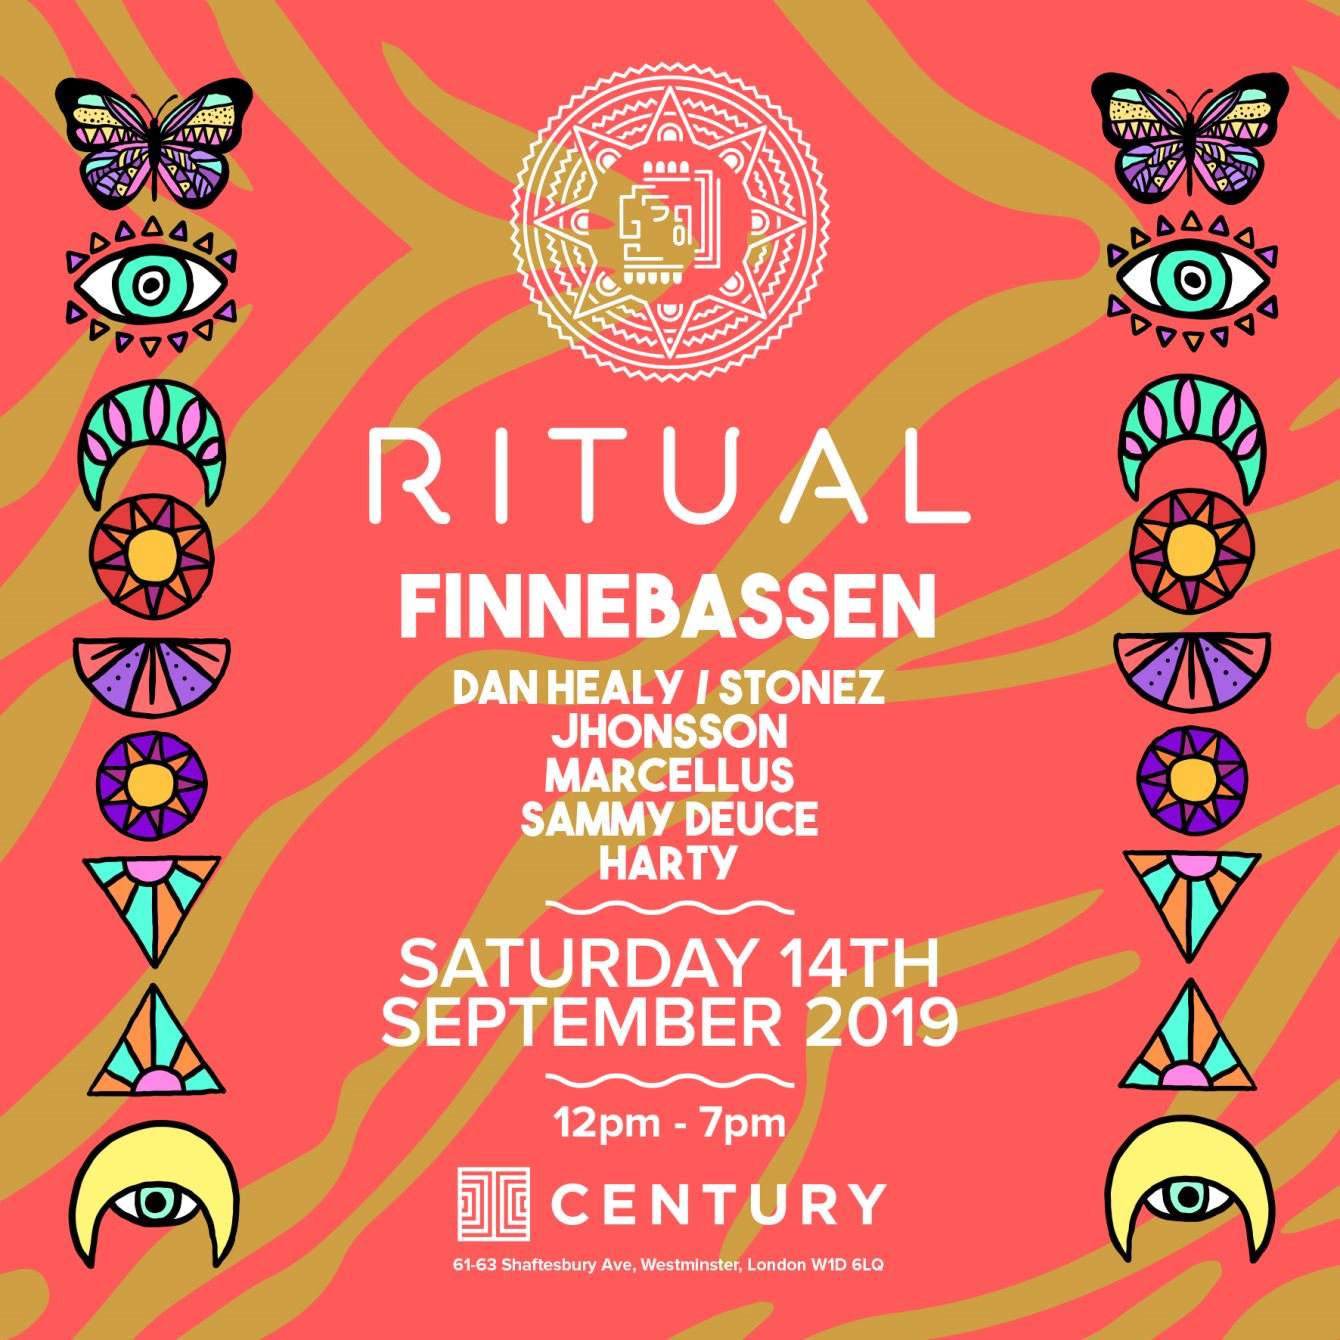 Ritual - Summer Closing Rooftop Party with Finnebassen - Página frontal